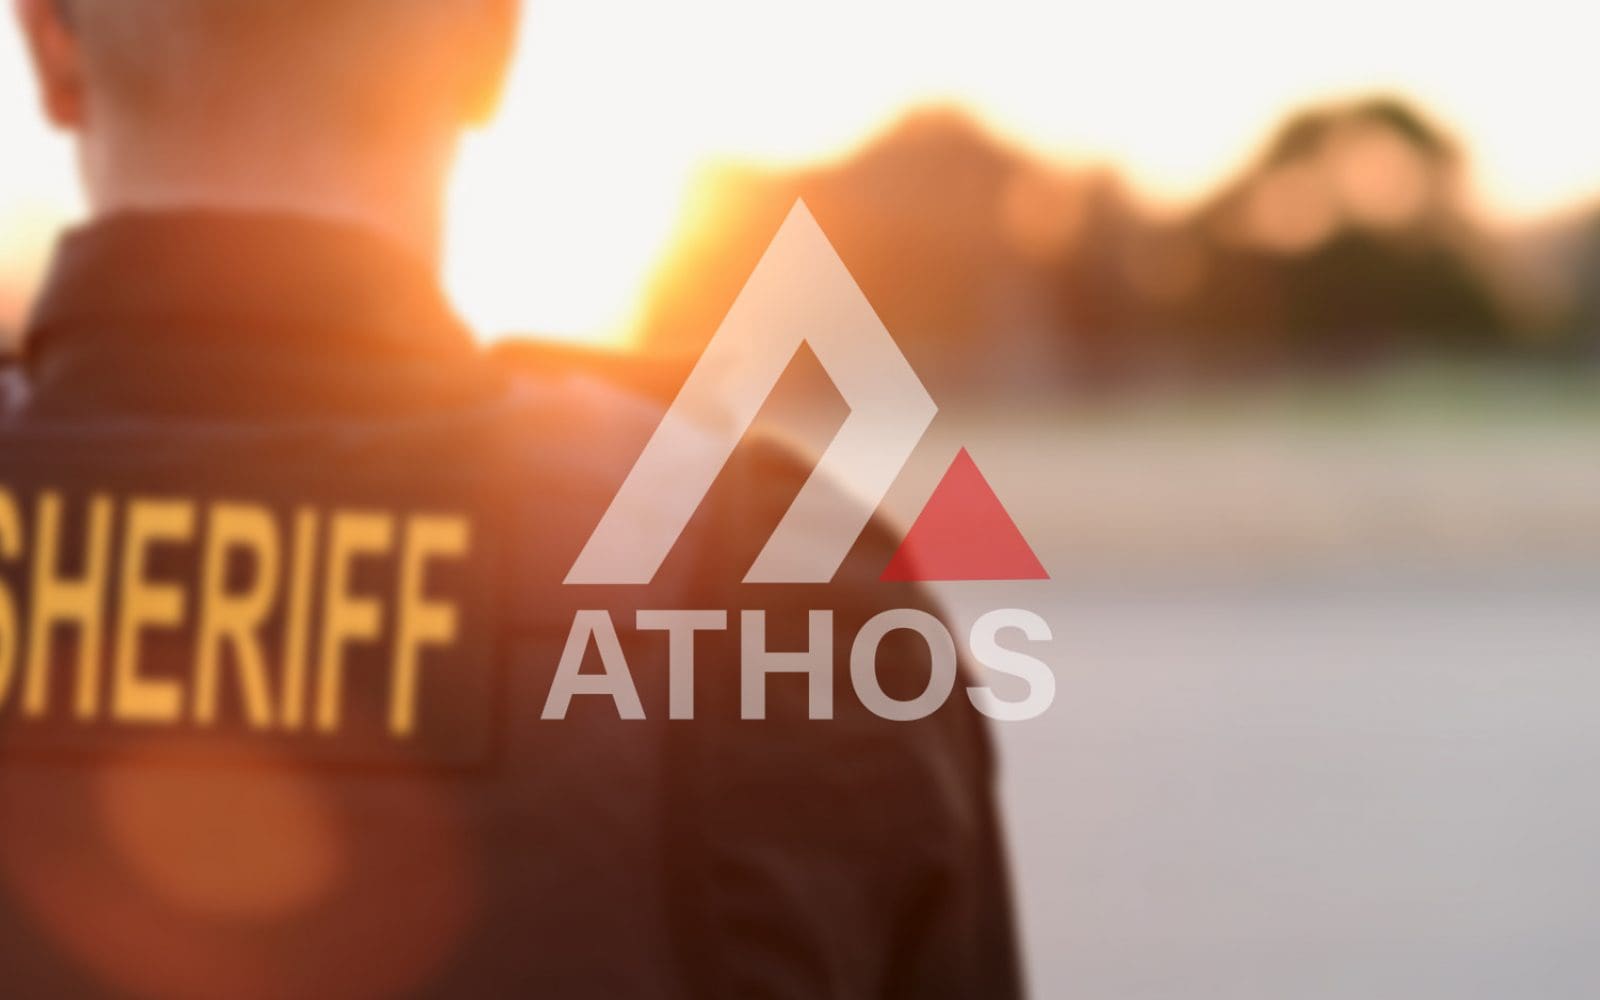 The Athos Group - Dallas Advertising Agency - Dallas Marketing Agency - Ad Agency Dallas TX - Agency Creative